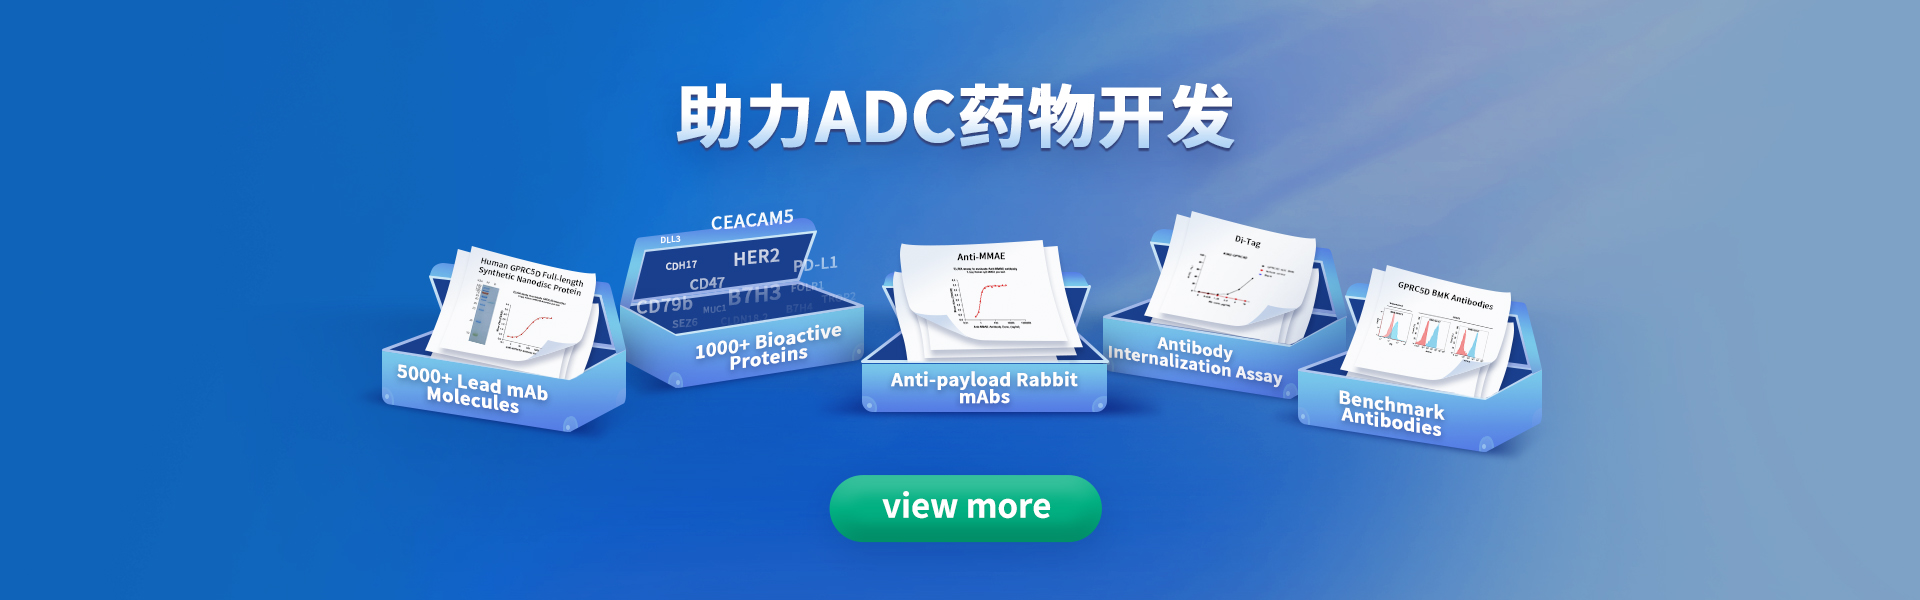 mainpage-ADC banner 副本 1